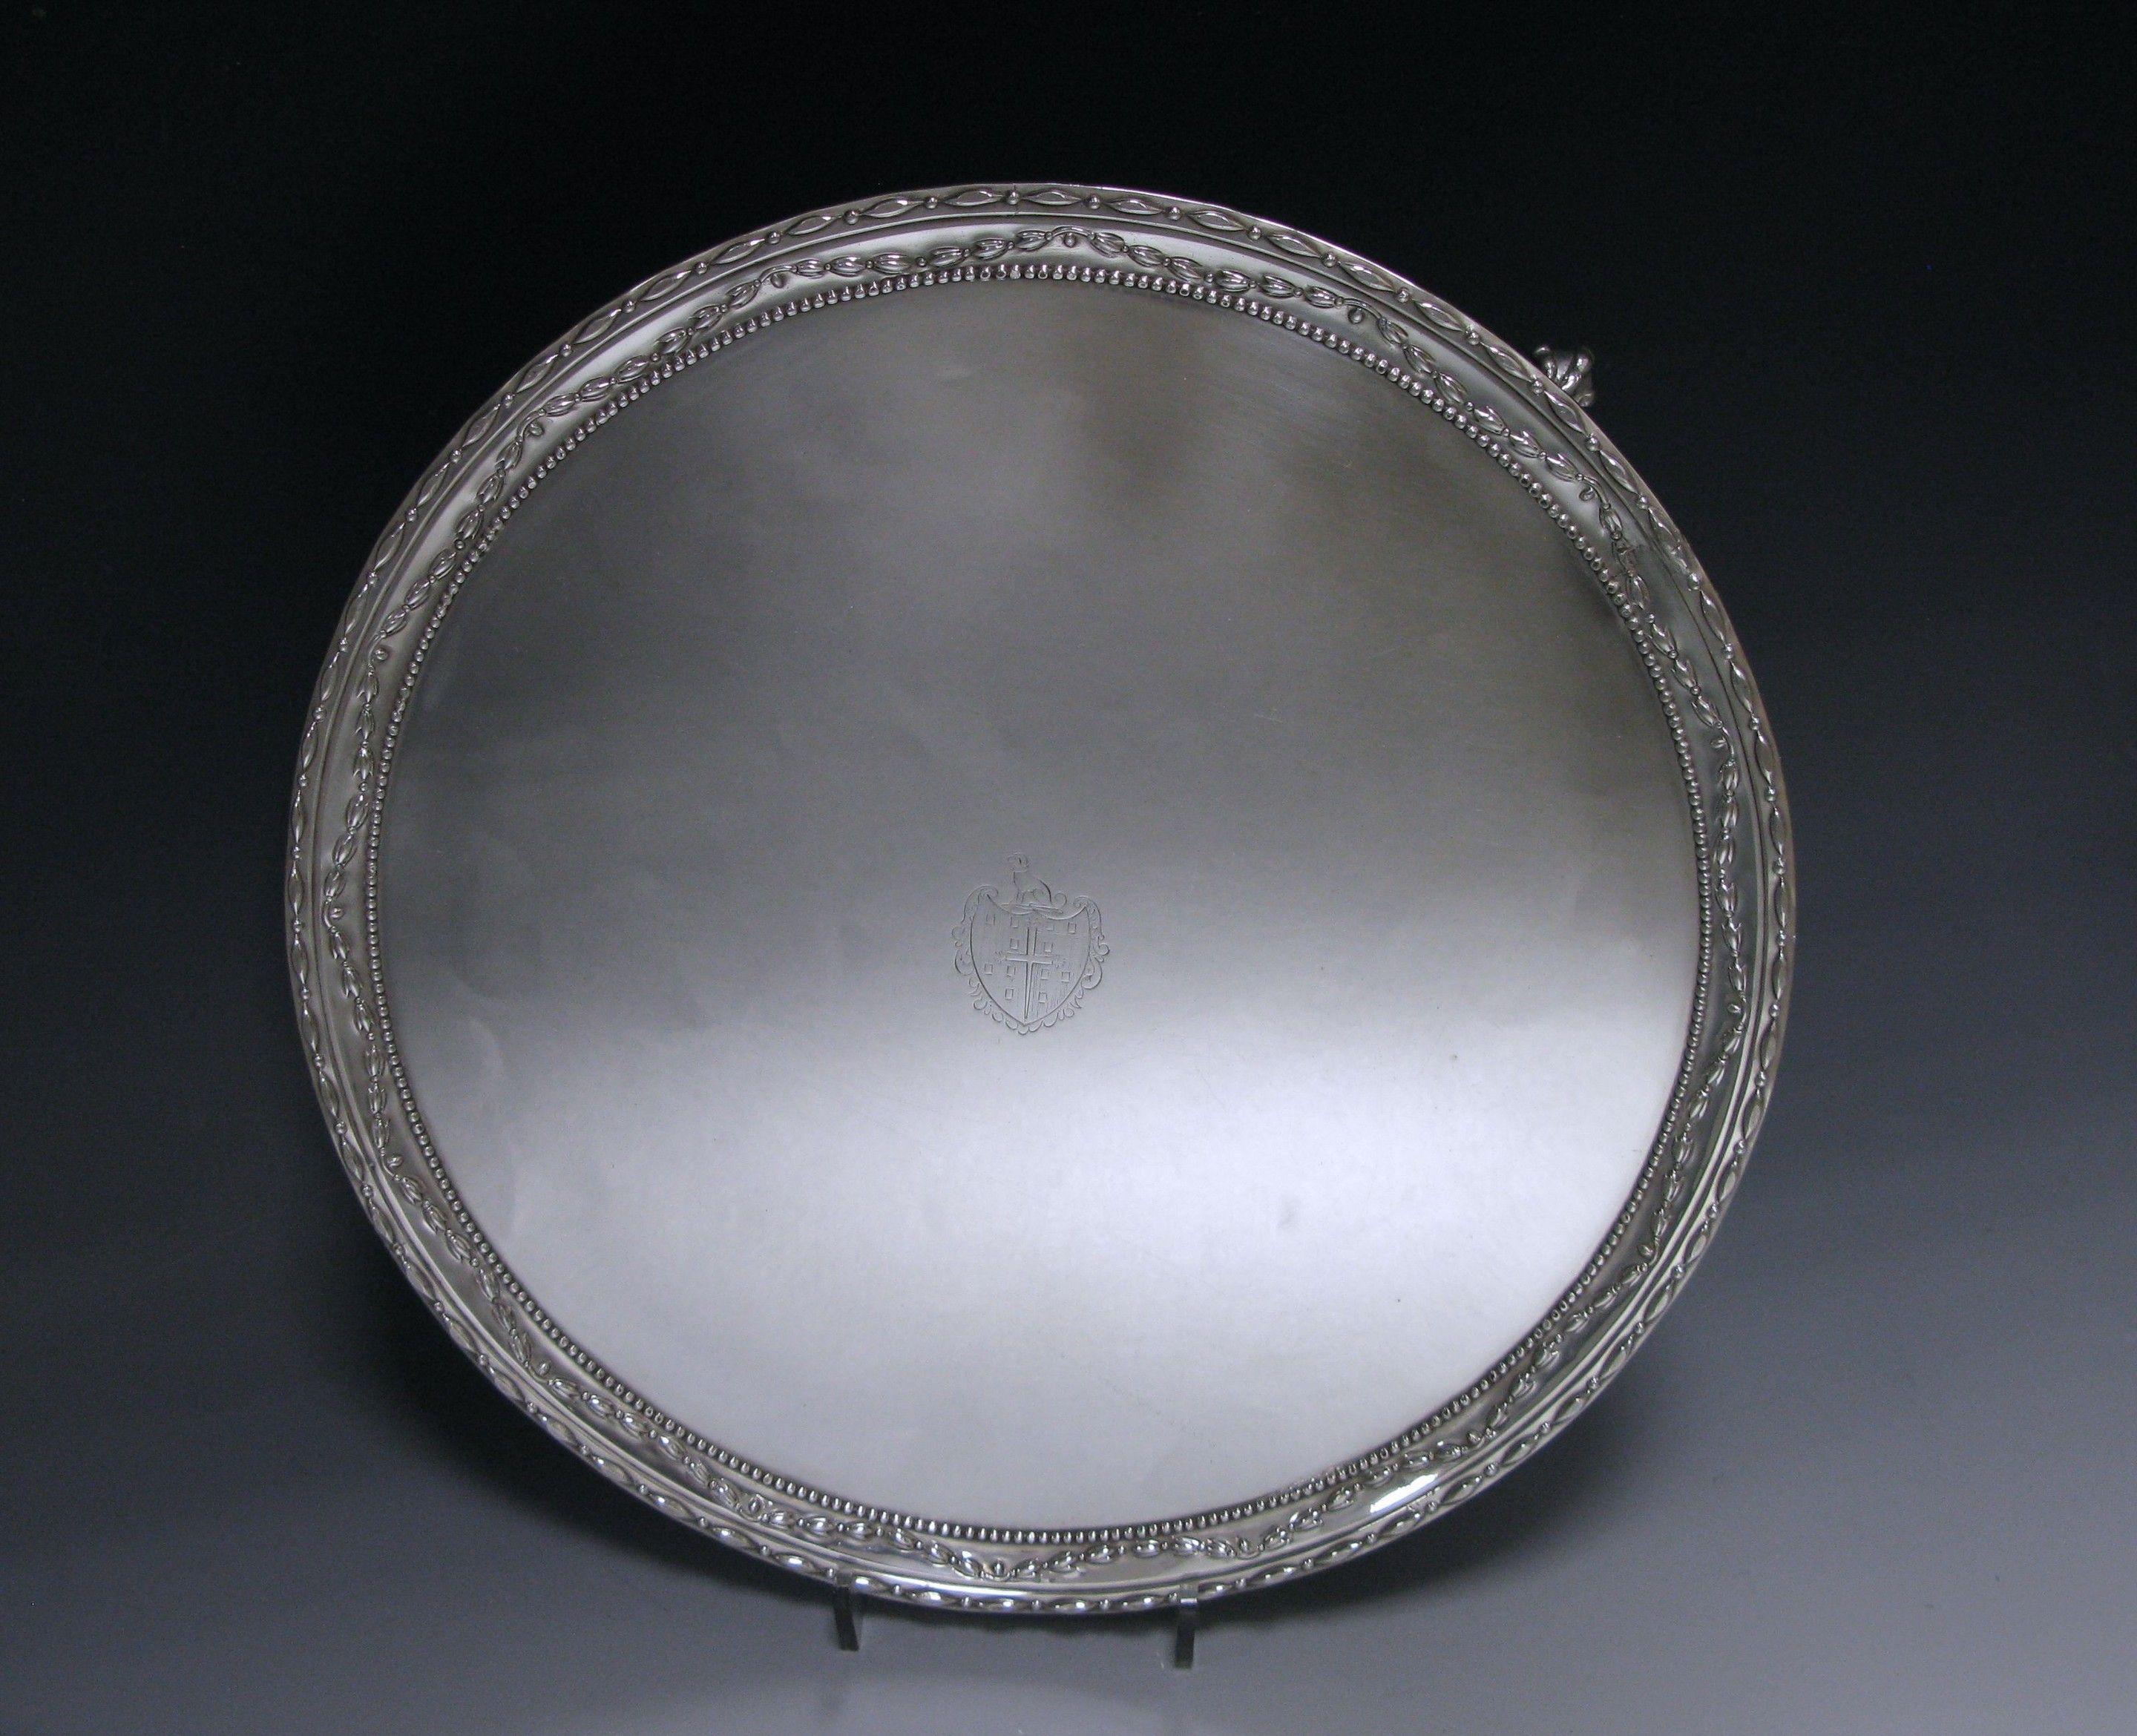 A George III antique silver Salver of circular form, with swag and bead border, the salver stands on three claw and ball feet. The centre is engraved with an armorial of “The arms are those for Norris of Guist and Wood Norton, Norfolk.”.